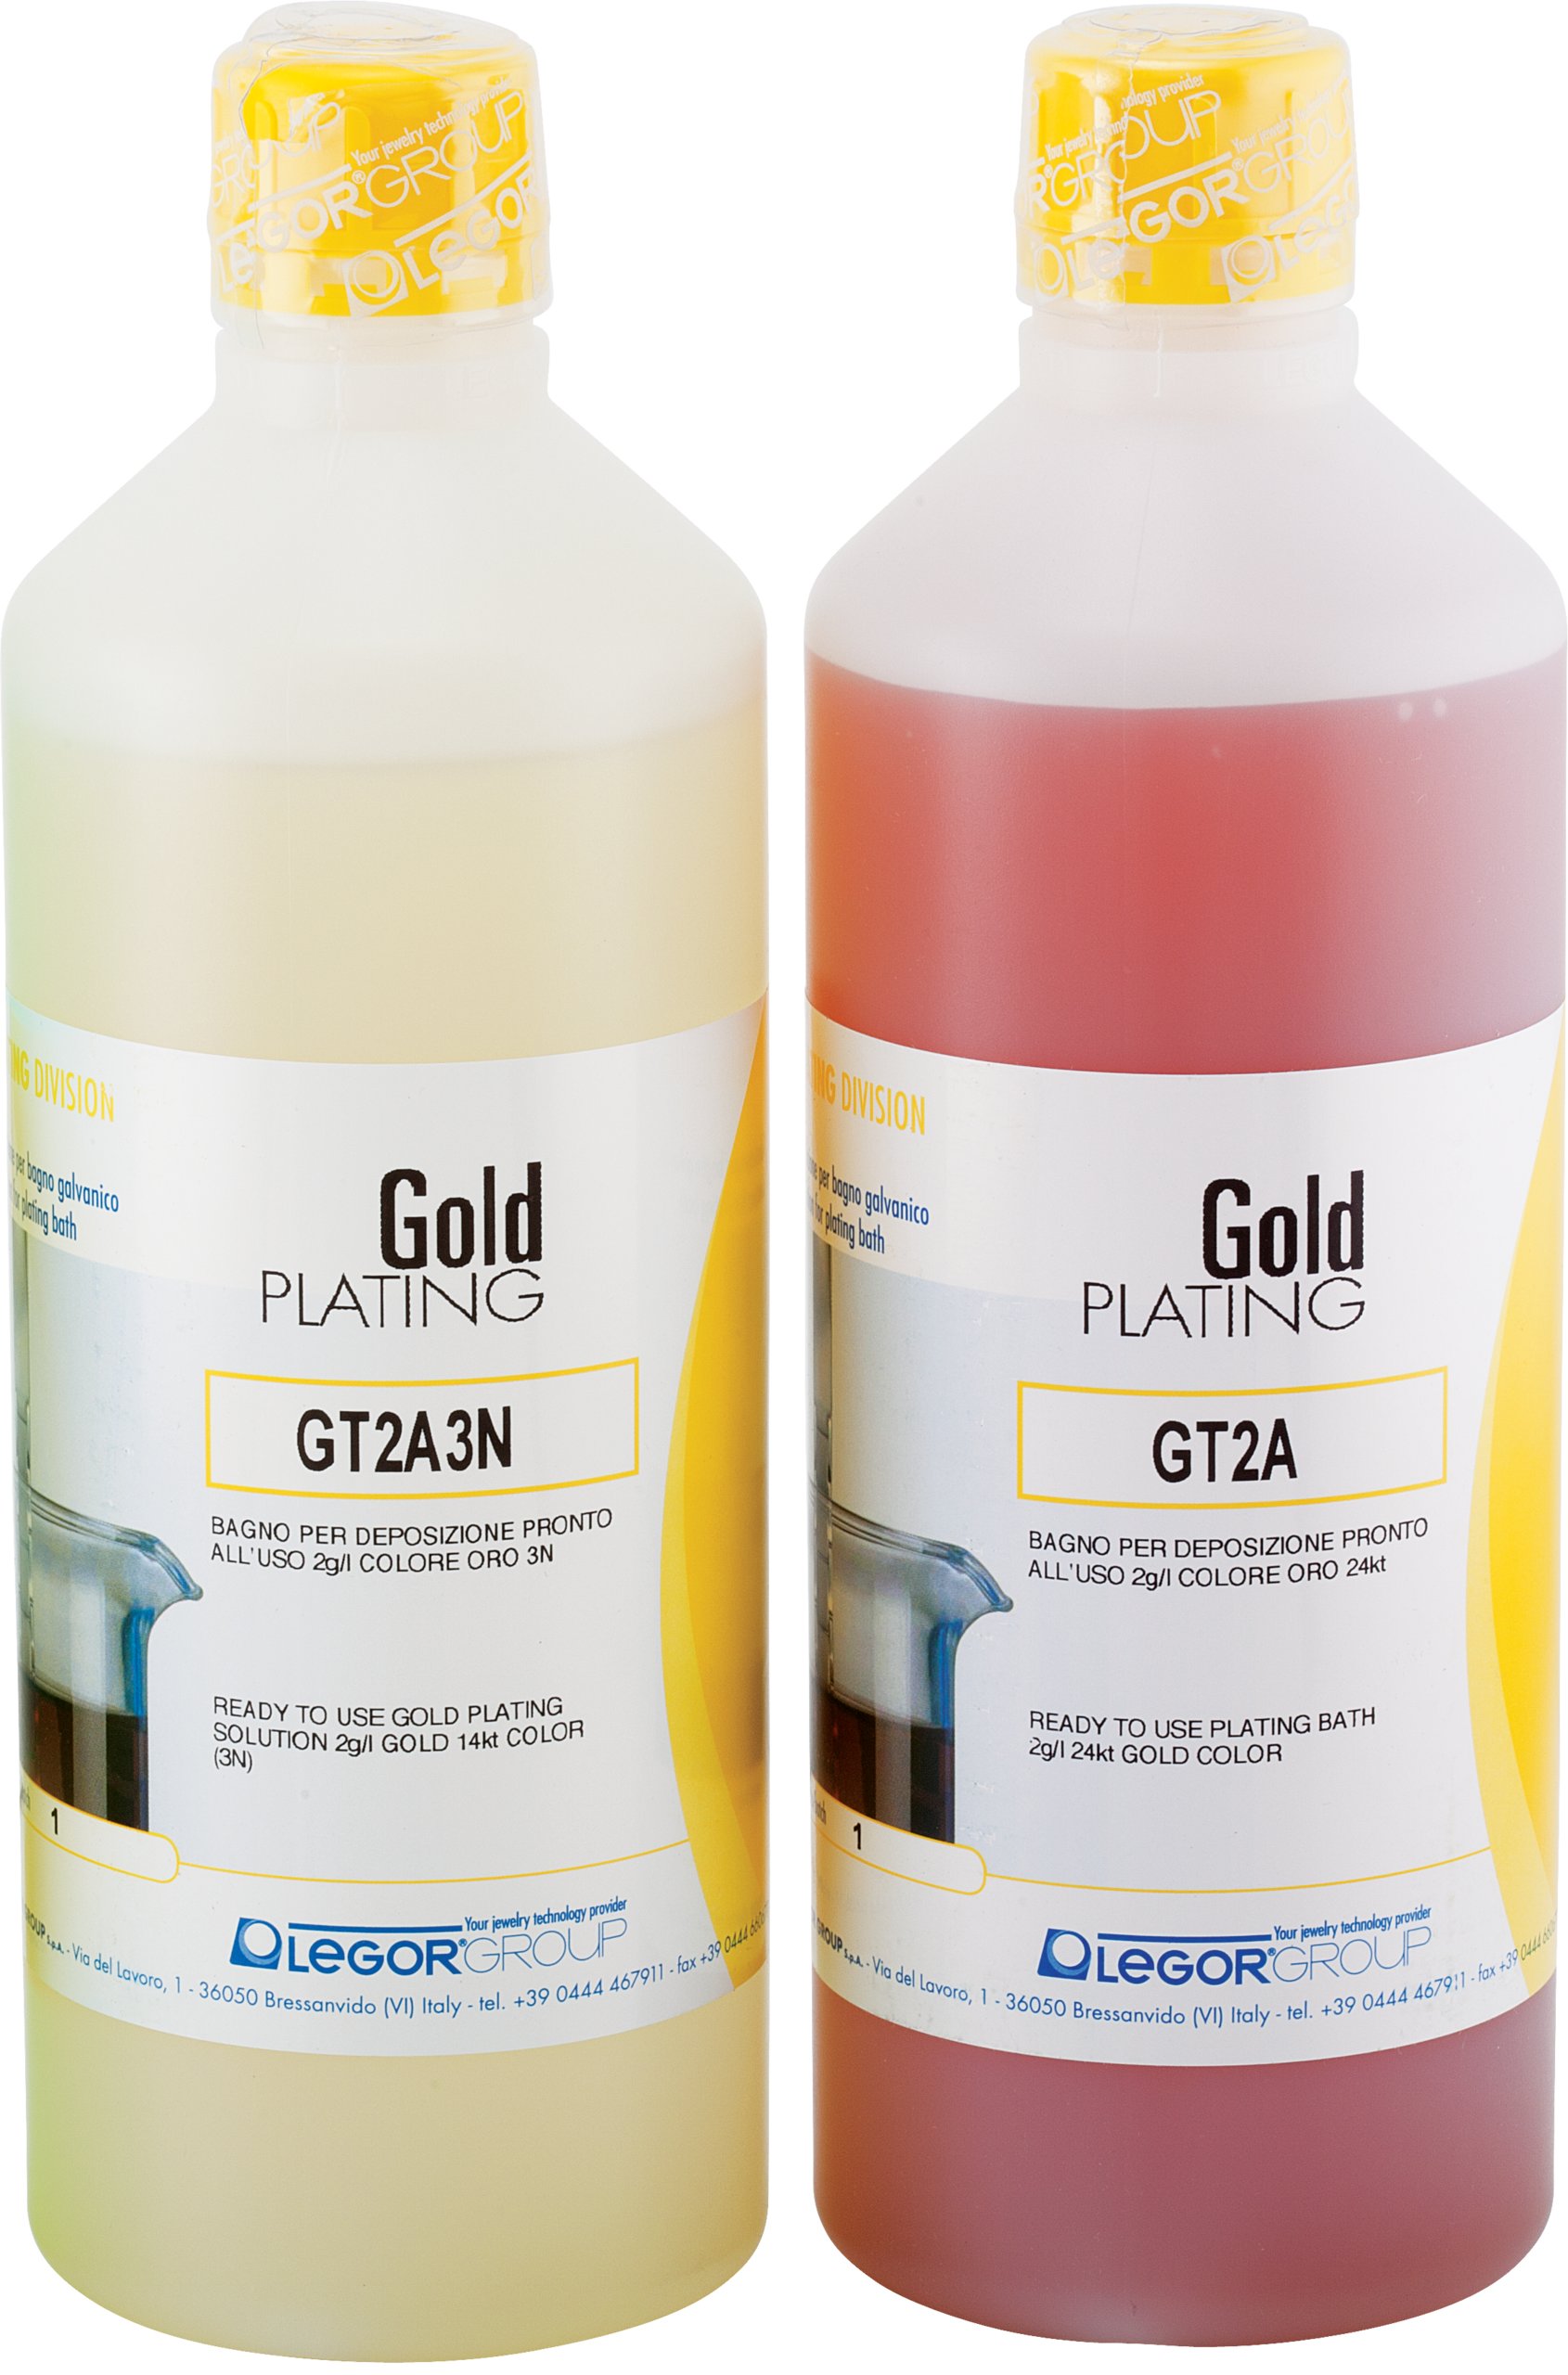 Clean Earth® 14K Gold Bath Plating Solution